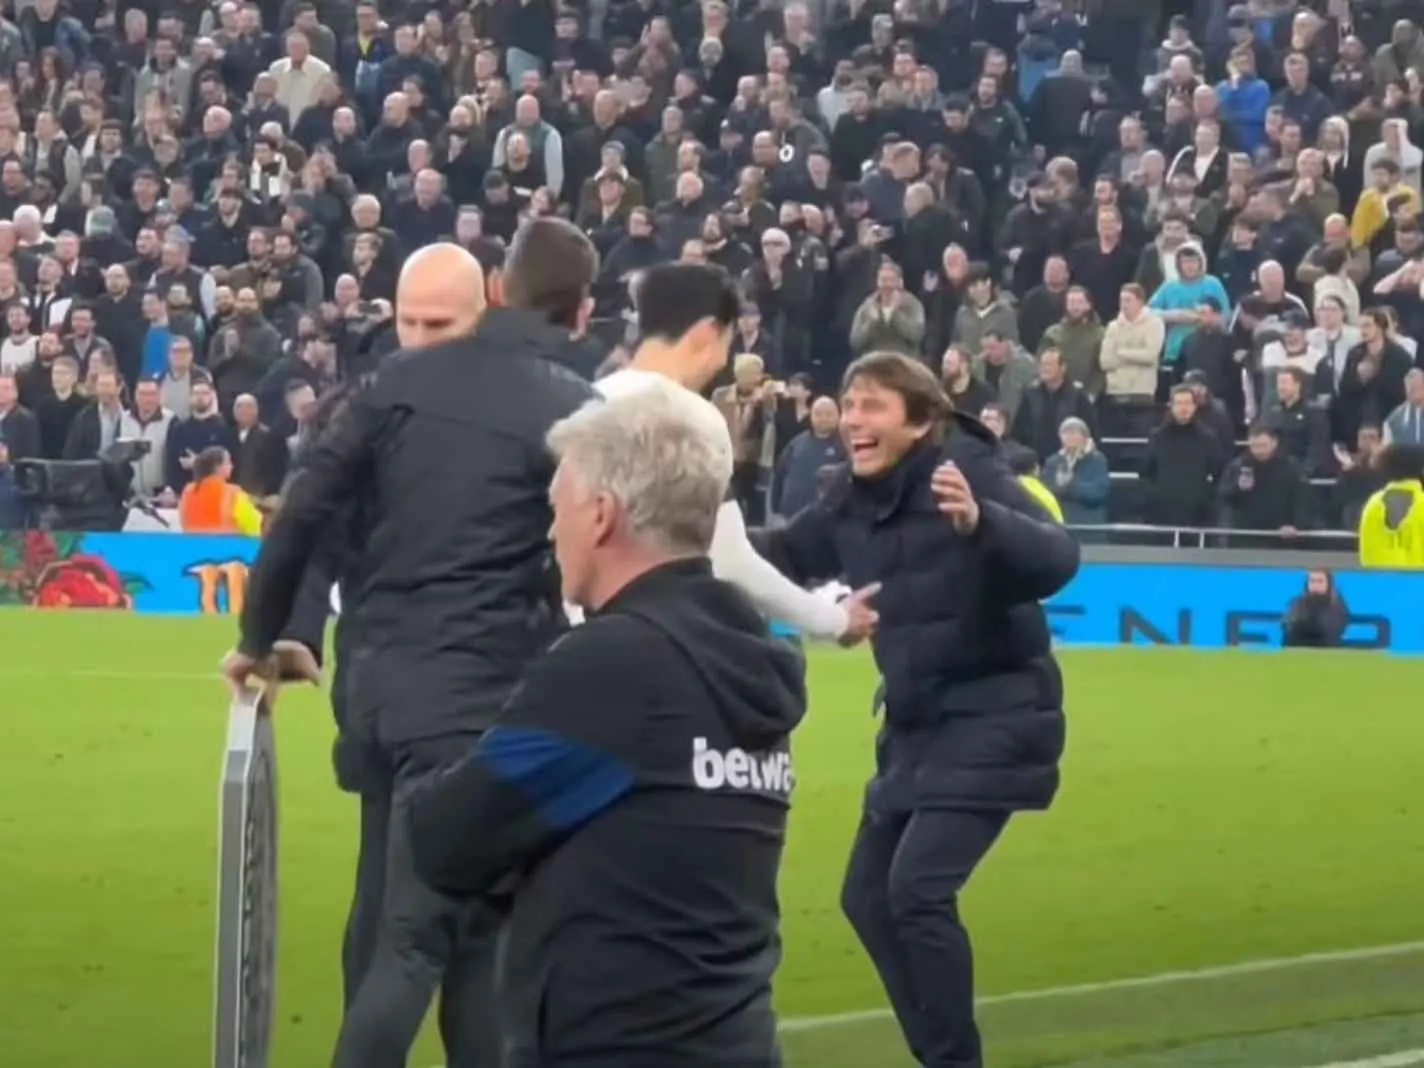 Find someone who looks at you the way Conte looks at Son.